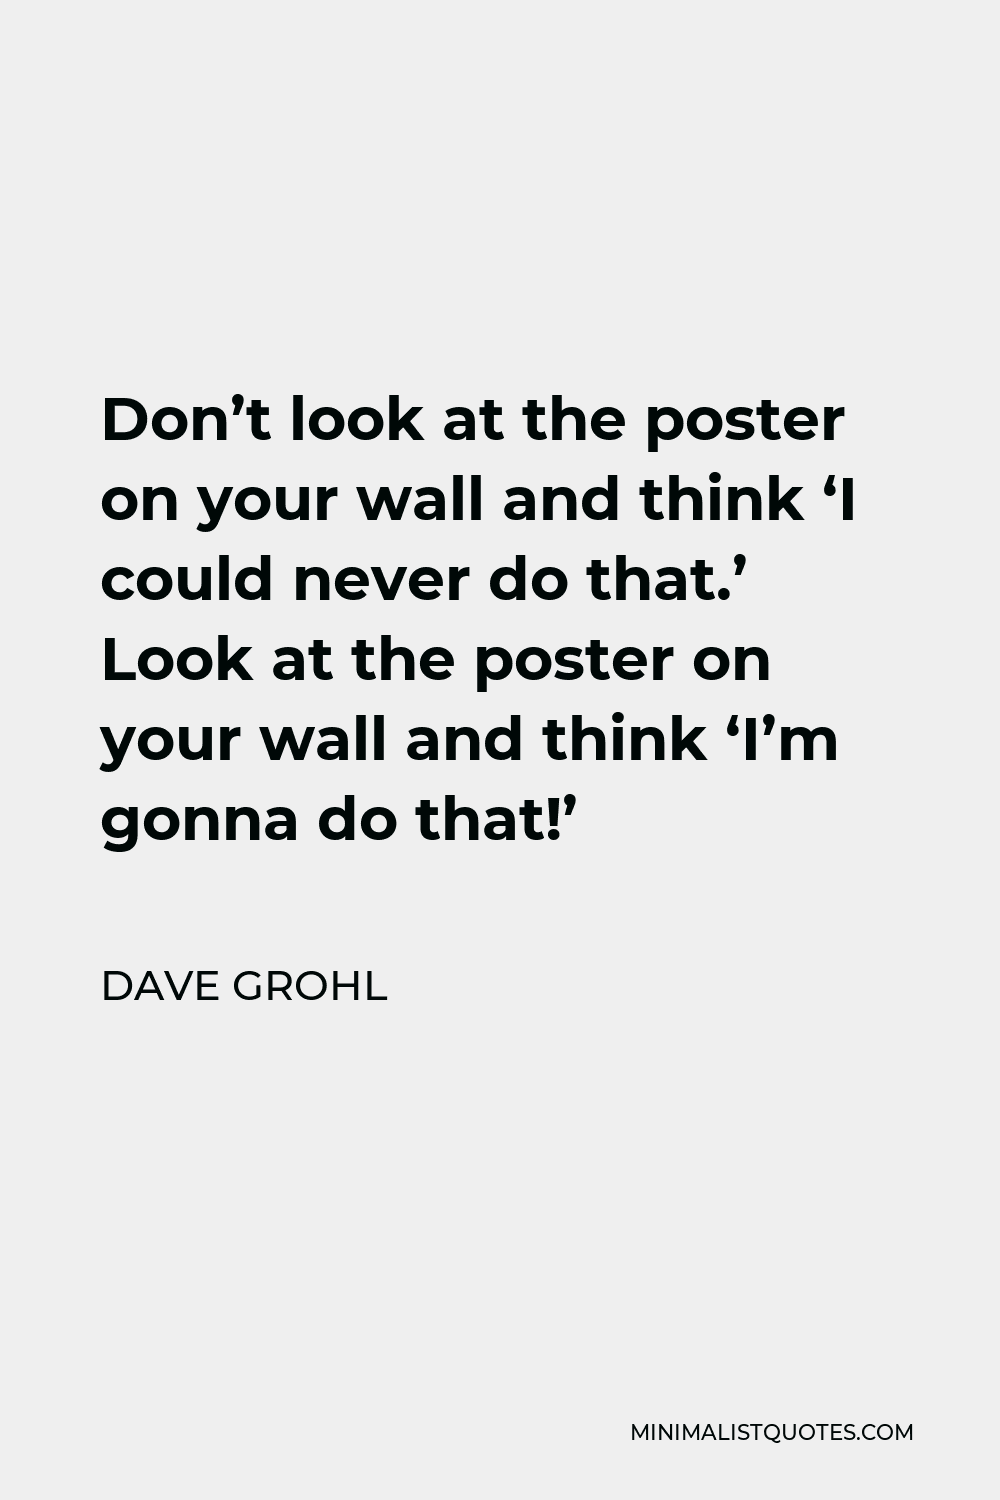 Dave Grohl Quote - Don’t look at the poster on your wall and think ‘I could never do that.’ Look at the poster on your wall and think ‘I’m gonna do that!’